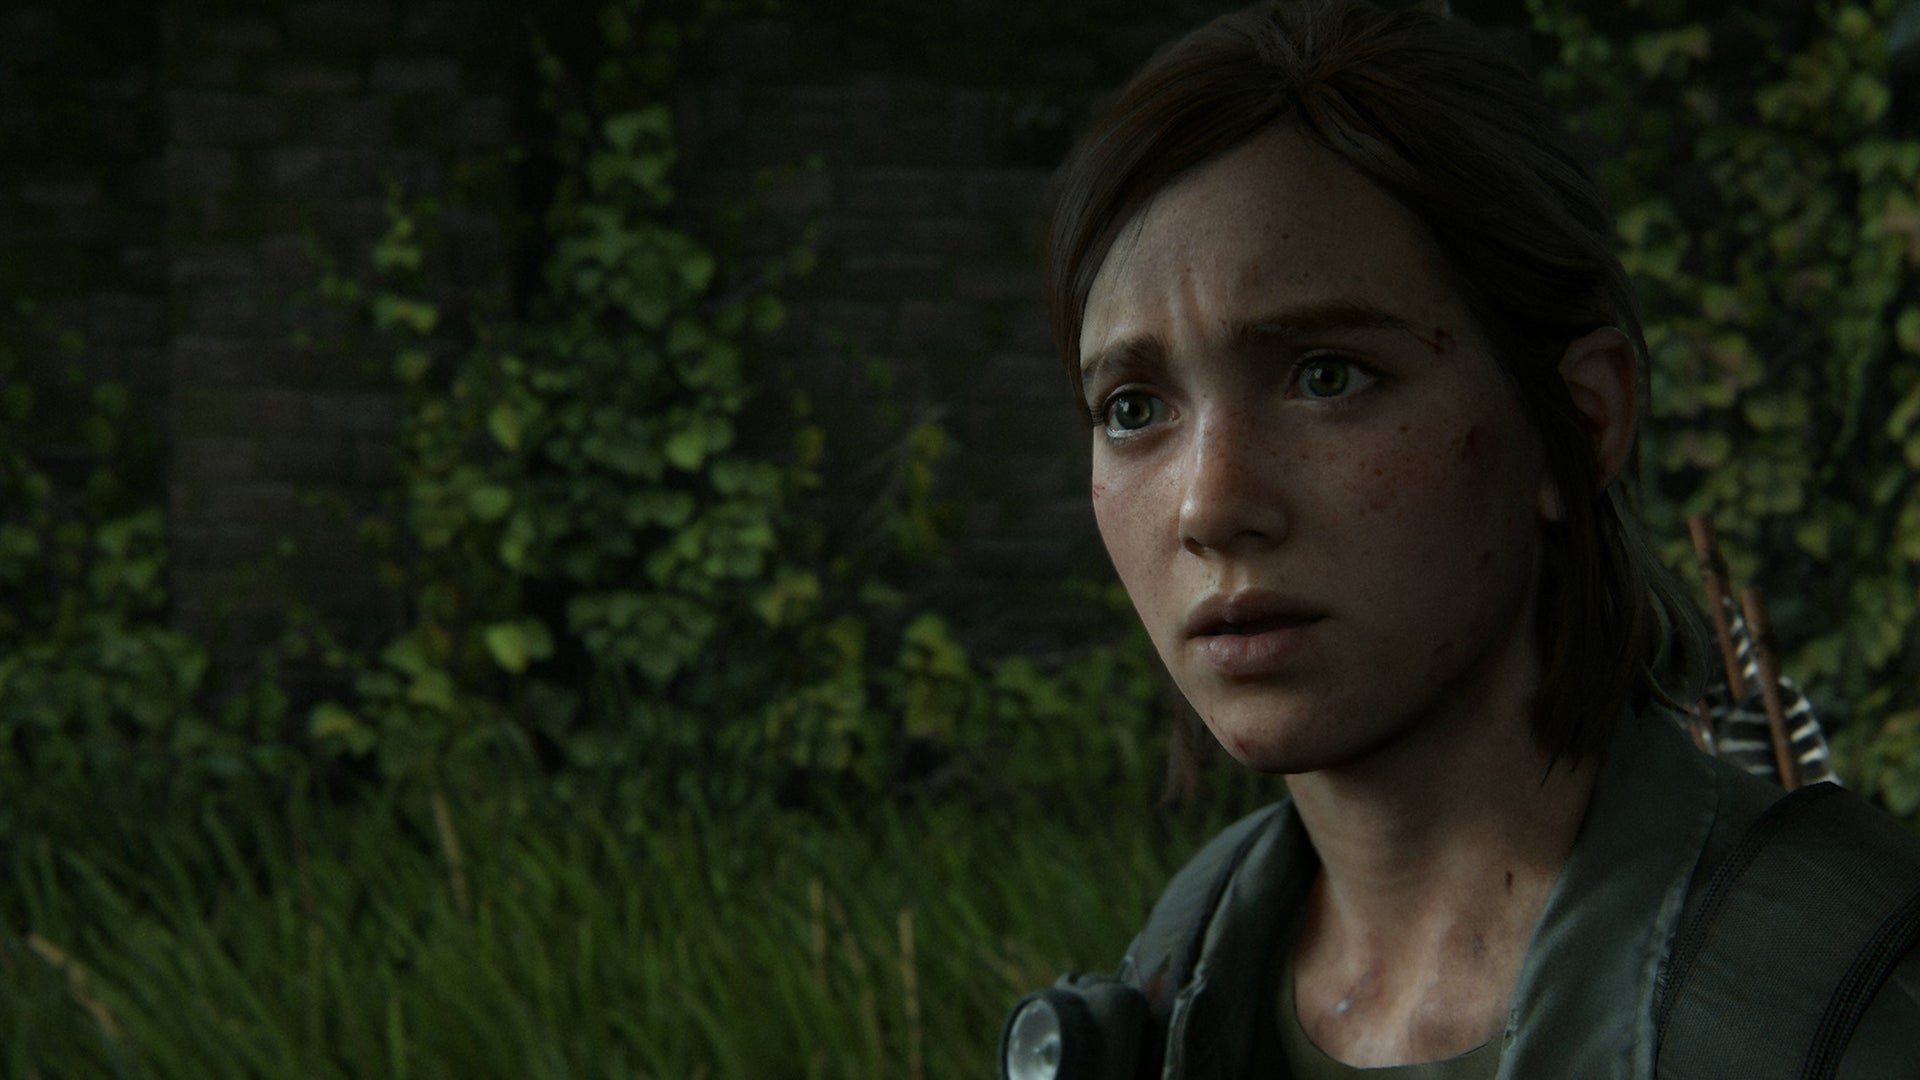 Image for Naughty Dog Wants The Last of Us Part 2's Combat To Make You "Vulnerable"